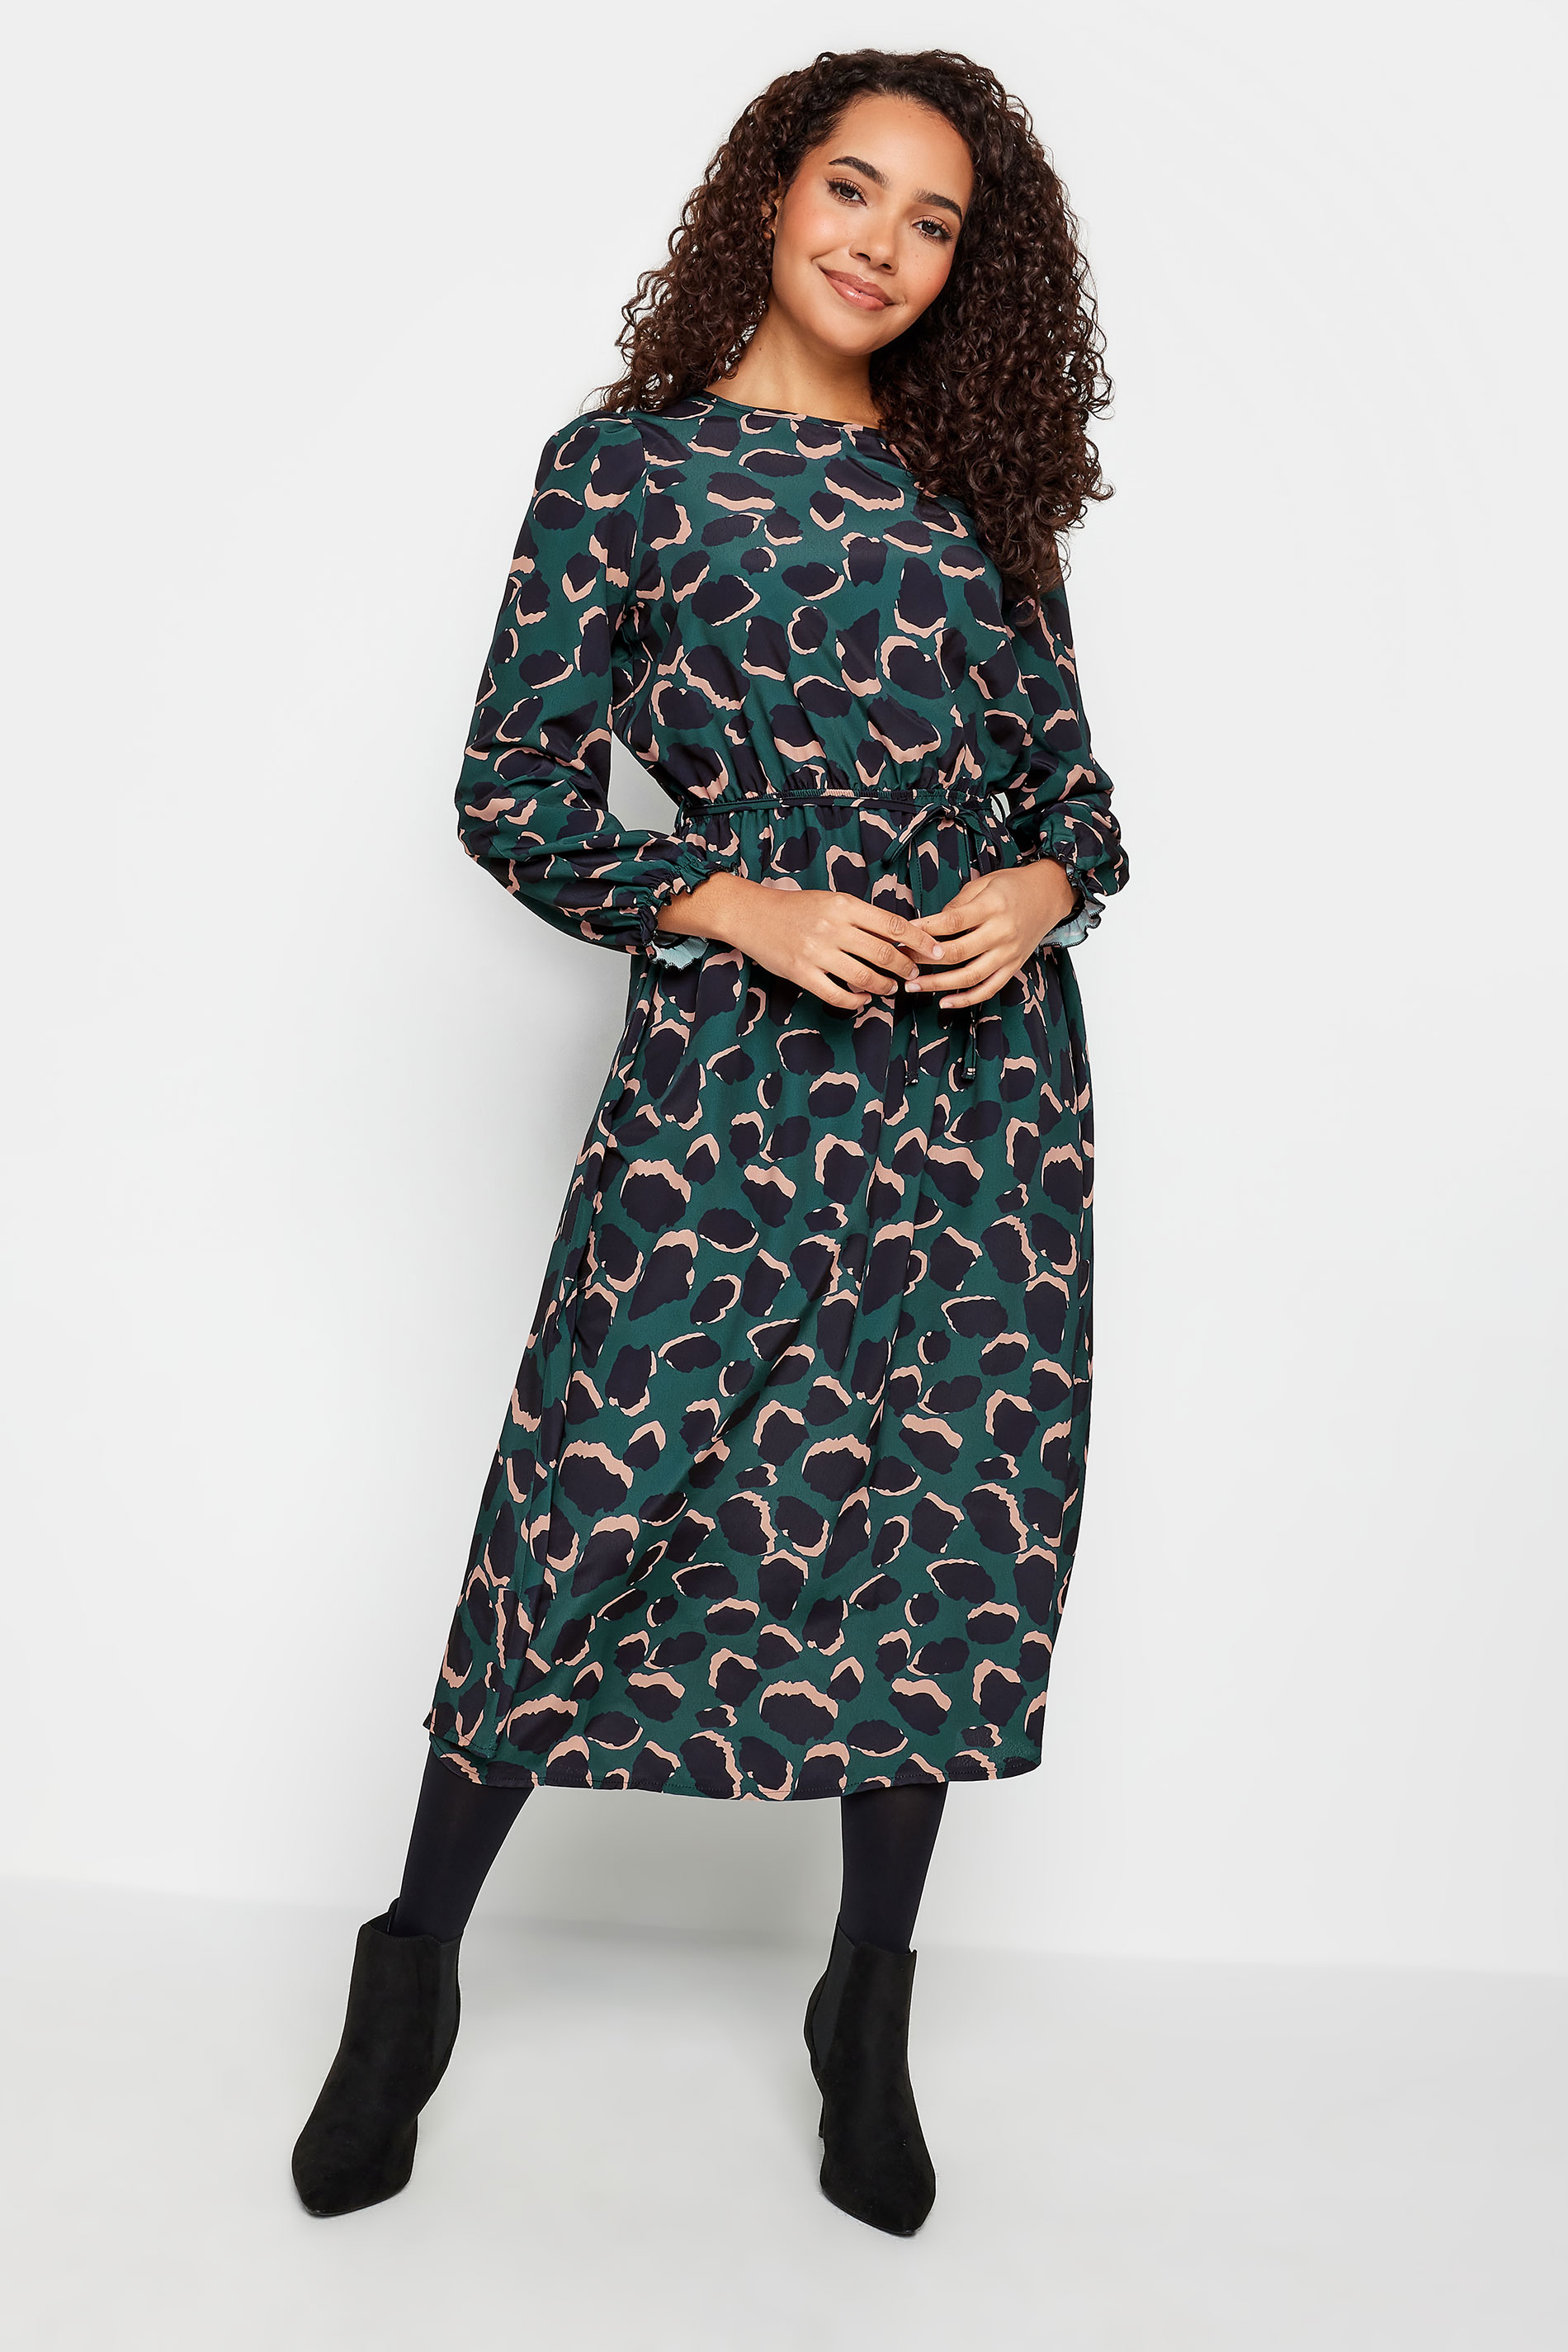 M&Co Green Abstract Print Smock Dress | M&Co 2